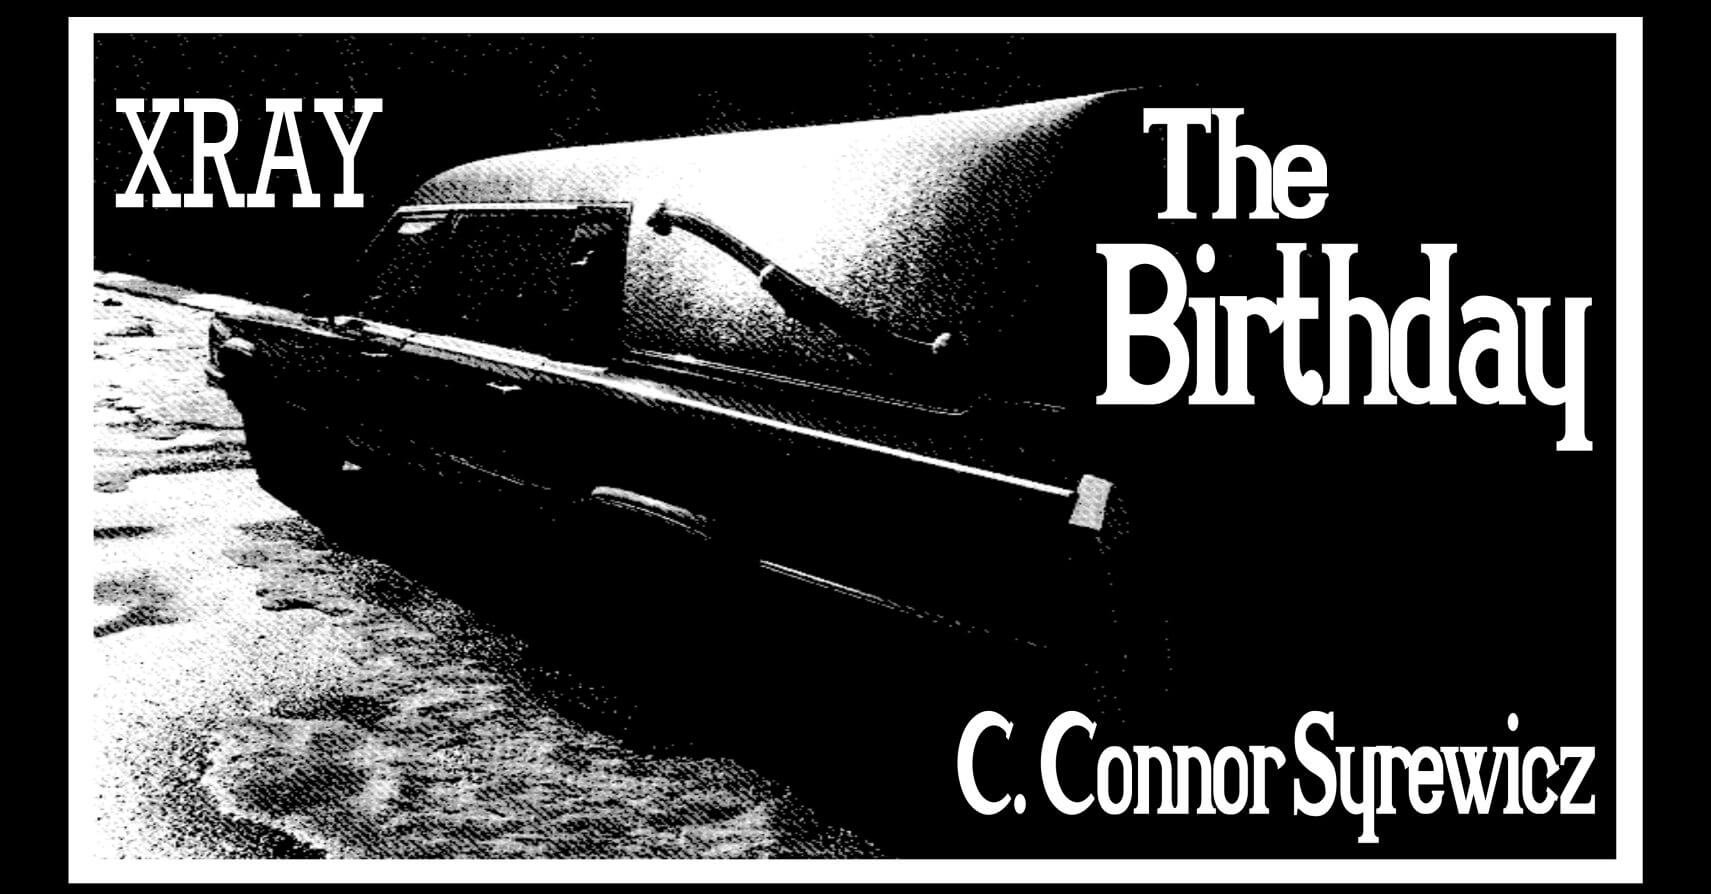 THE BIRTHDAY by C. Connor Syrewicz